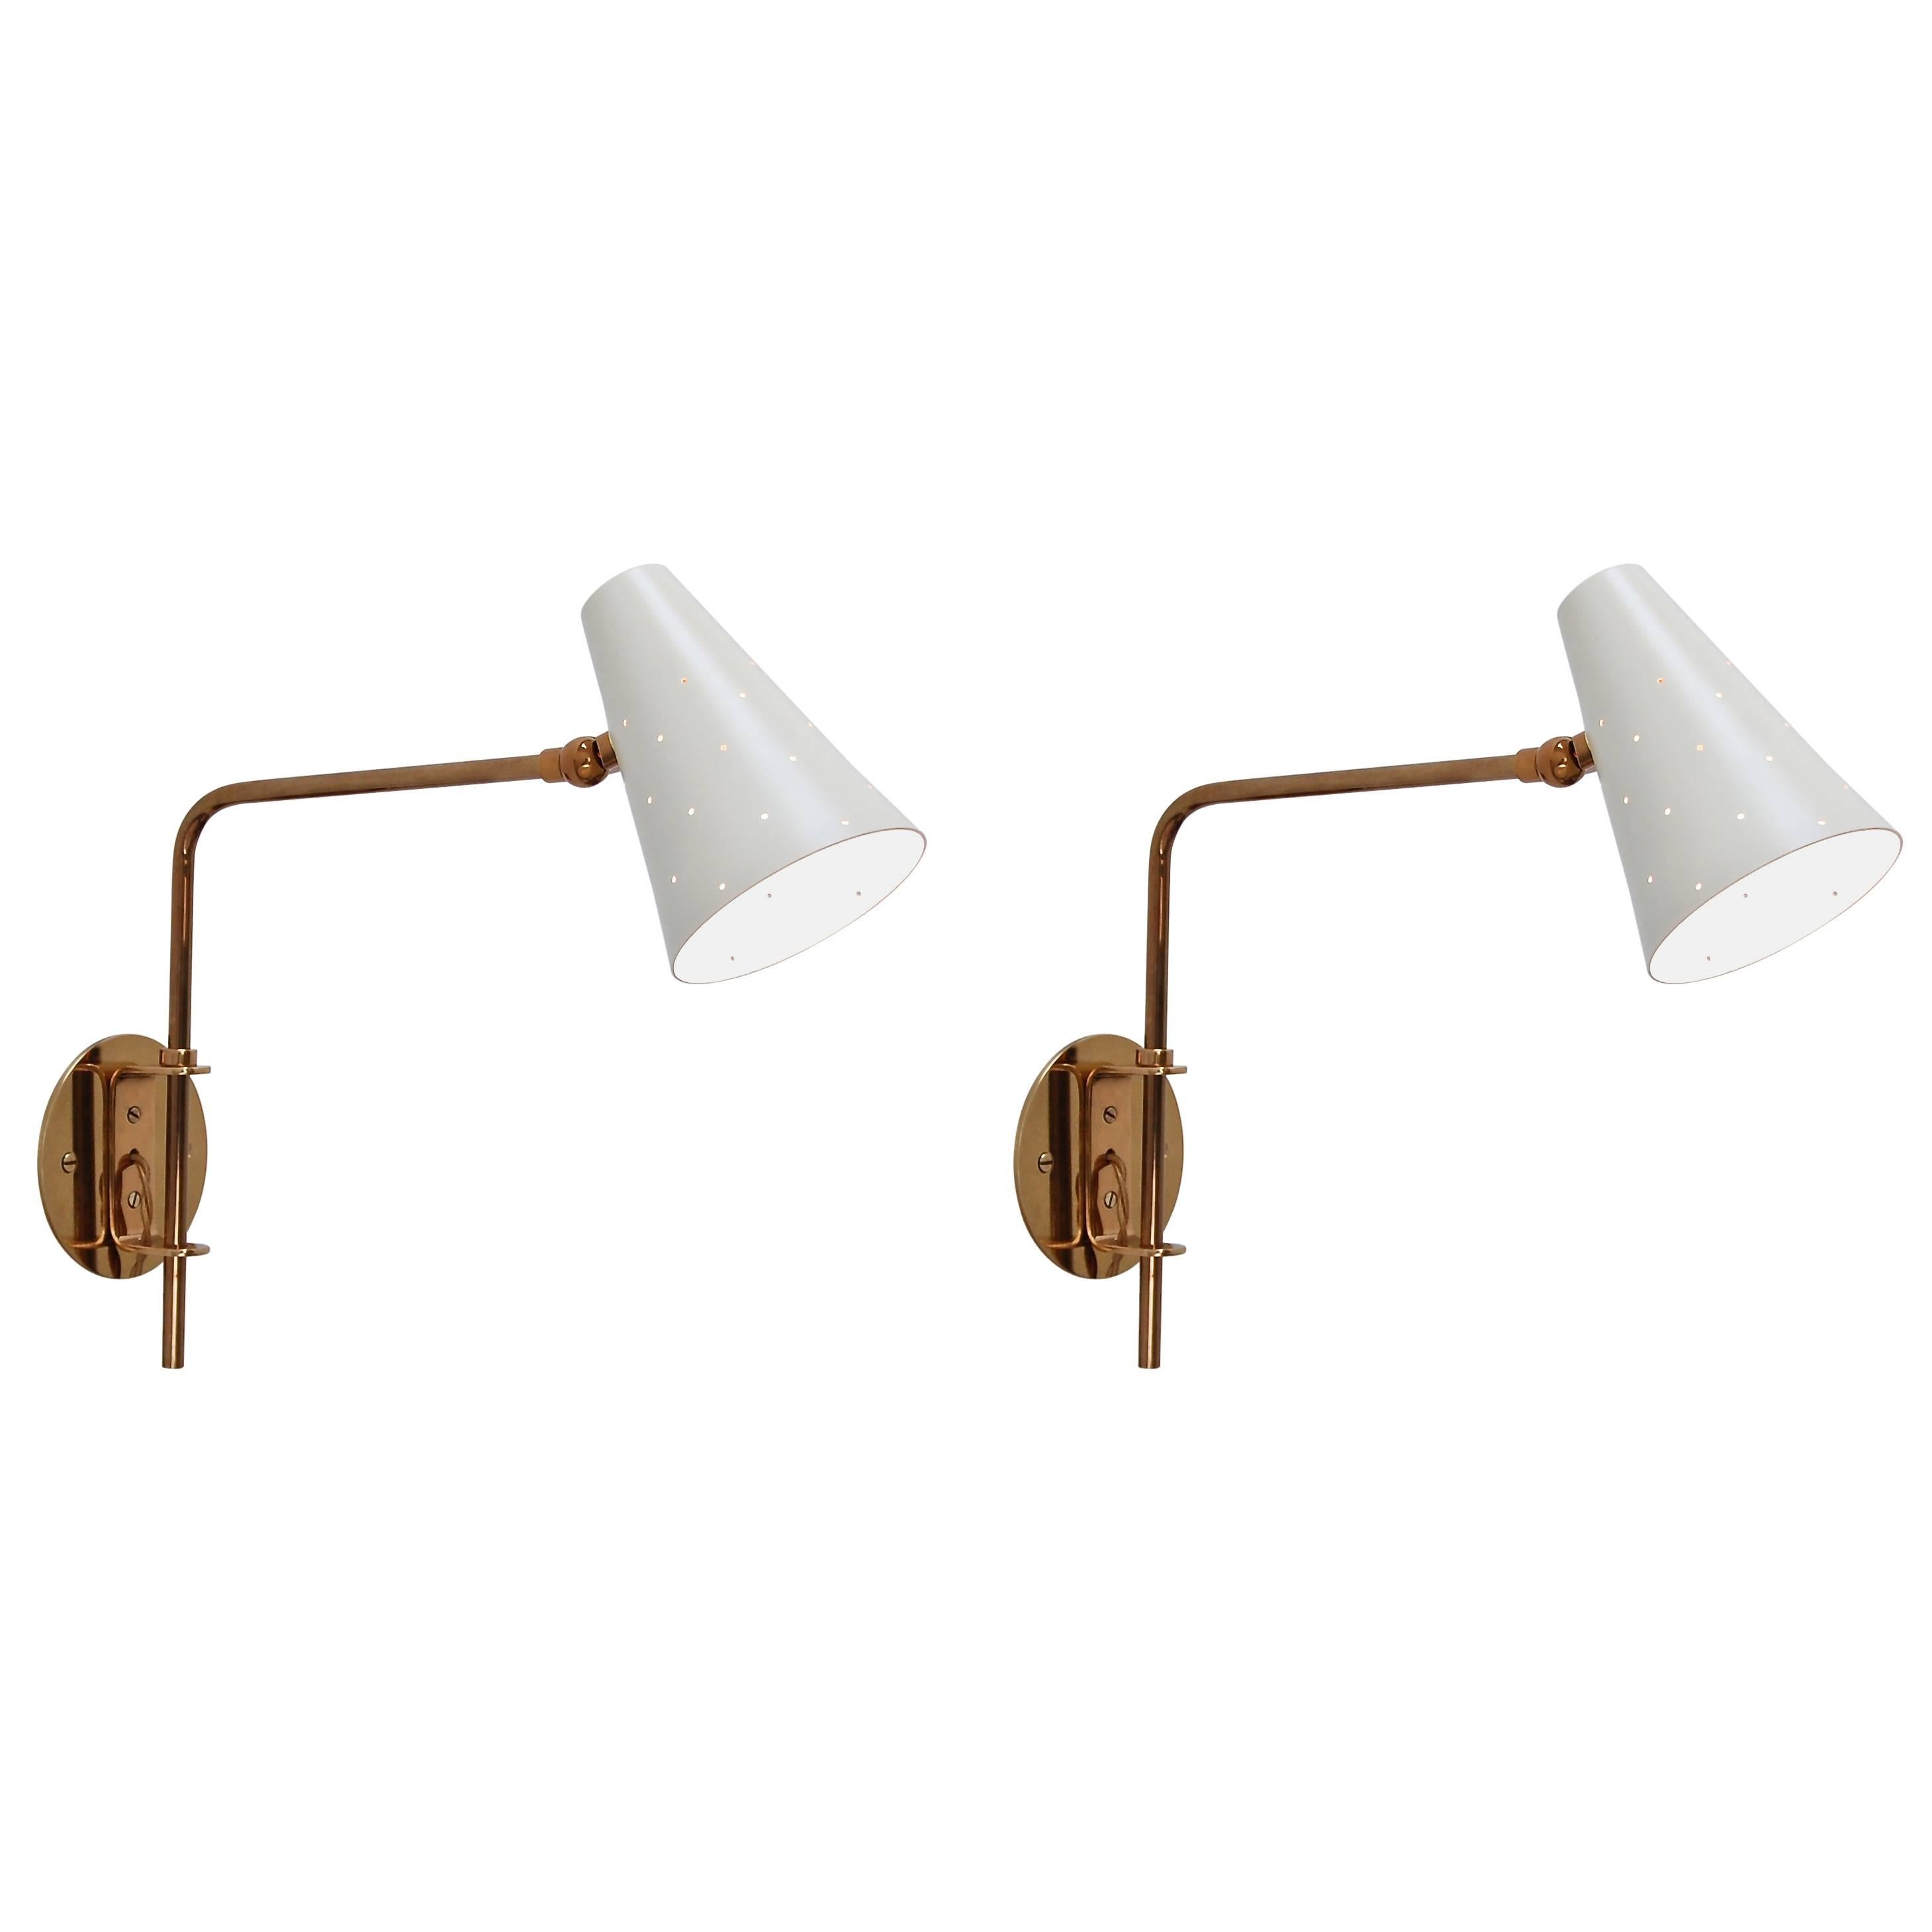 LUbrary Sconce by Lumfardo Luminaires For Sale